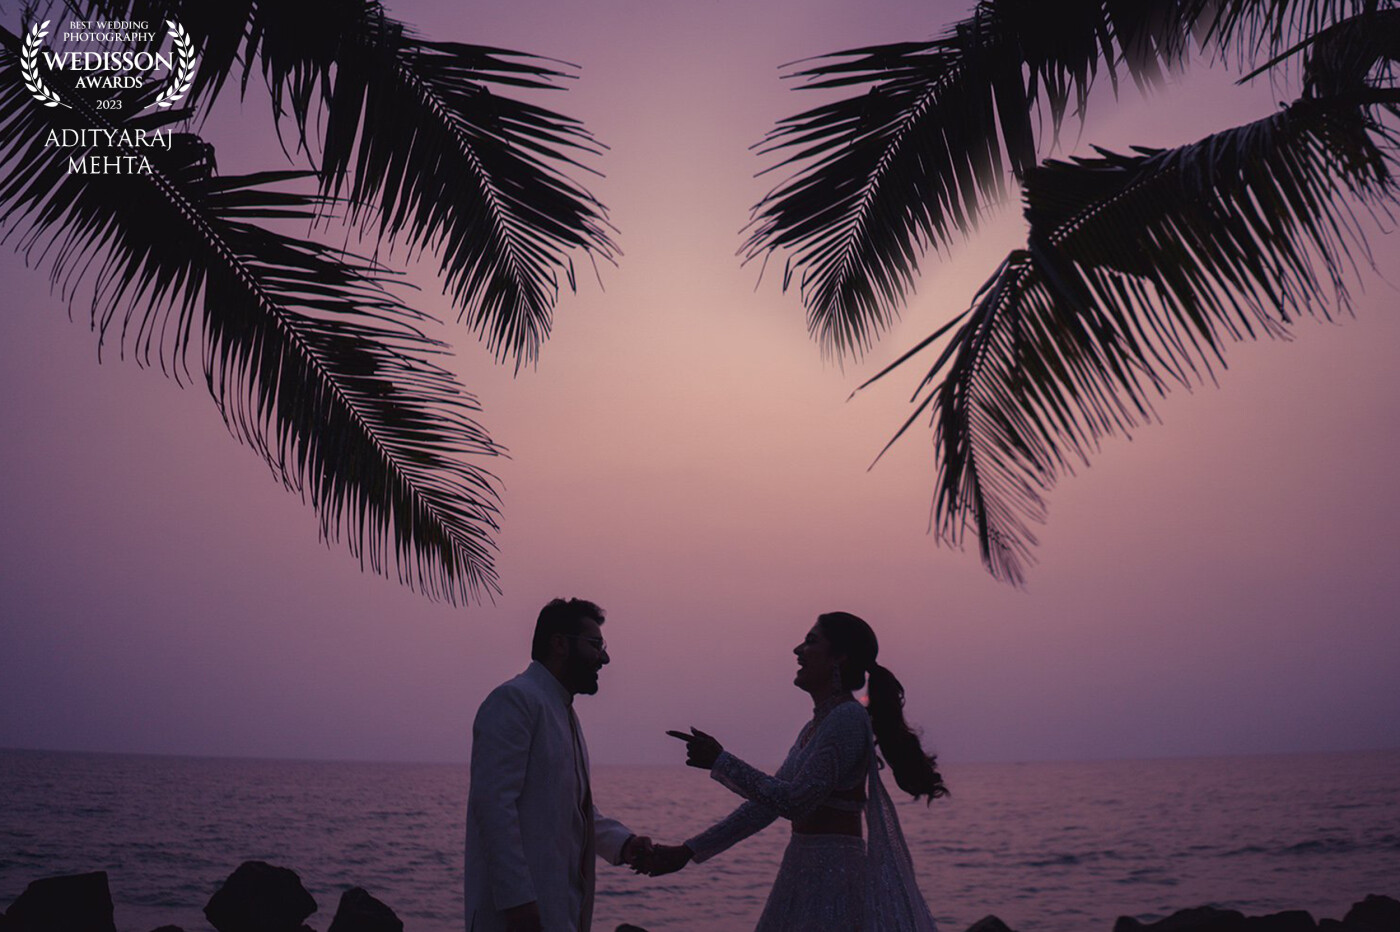 Drasti & Karan had a magical wedding set against the backwaters in Kerala, India. <br />
<br />
Their chemistry is unparalleled, they cannot hold still for more than about 3 milliseconds, and so giving them any kid of poses was an impossible task. The sun had already set, and there is this brief 60 second window in between sunset and blue hour, around the coastal regions of South India, when the sky transitions from orange to a pinkish-purple hue, before turning to blue. It doesn't happen everyday, it is rare, but when it does, it looks magnificent!<br />
<br />
We had our frame ready, as soon as the sky turned the right hue, we asked them to step into frame and to just be themselves. This was just before their sangeet performance night, and so practicing their dance moves was all they could think of! This image here, is a BTS image of them practicing their first dance, moments before they get on stage, against a backdrop that probably only occurs one in a hundred times.